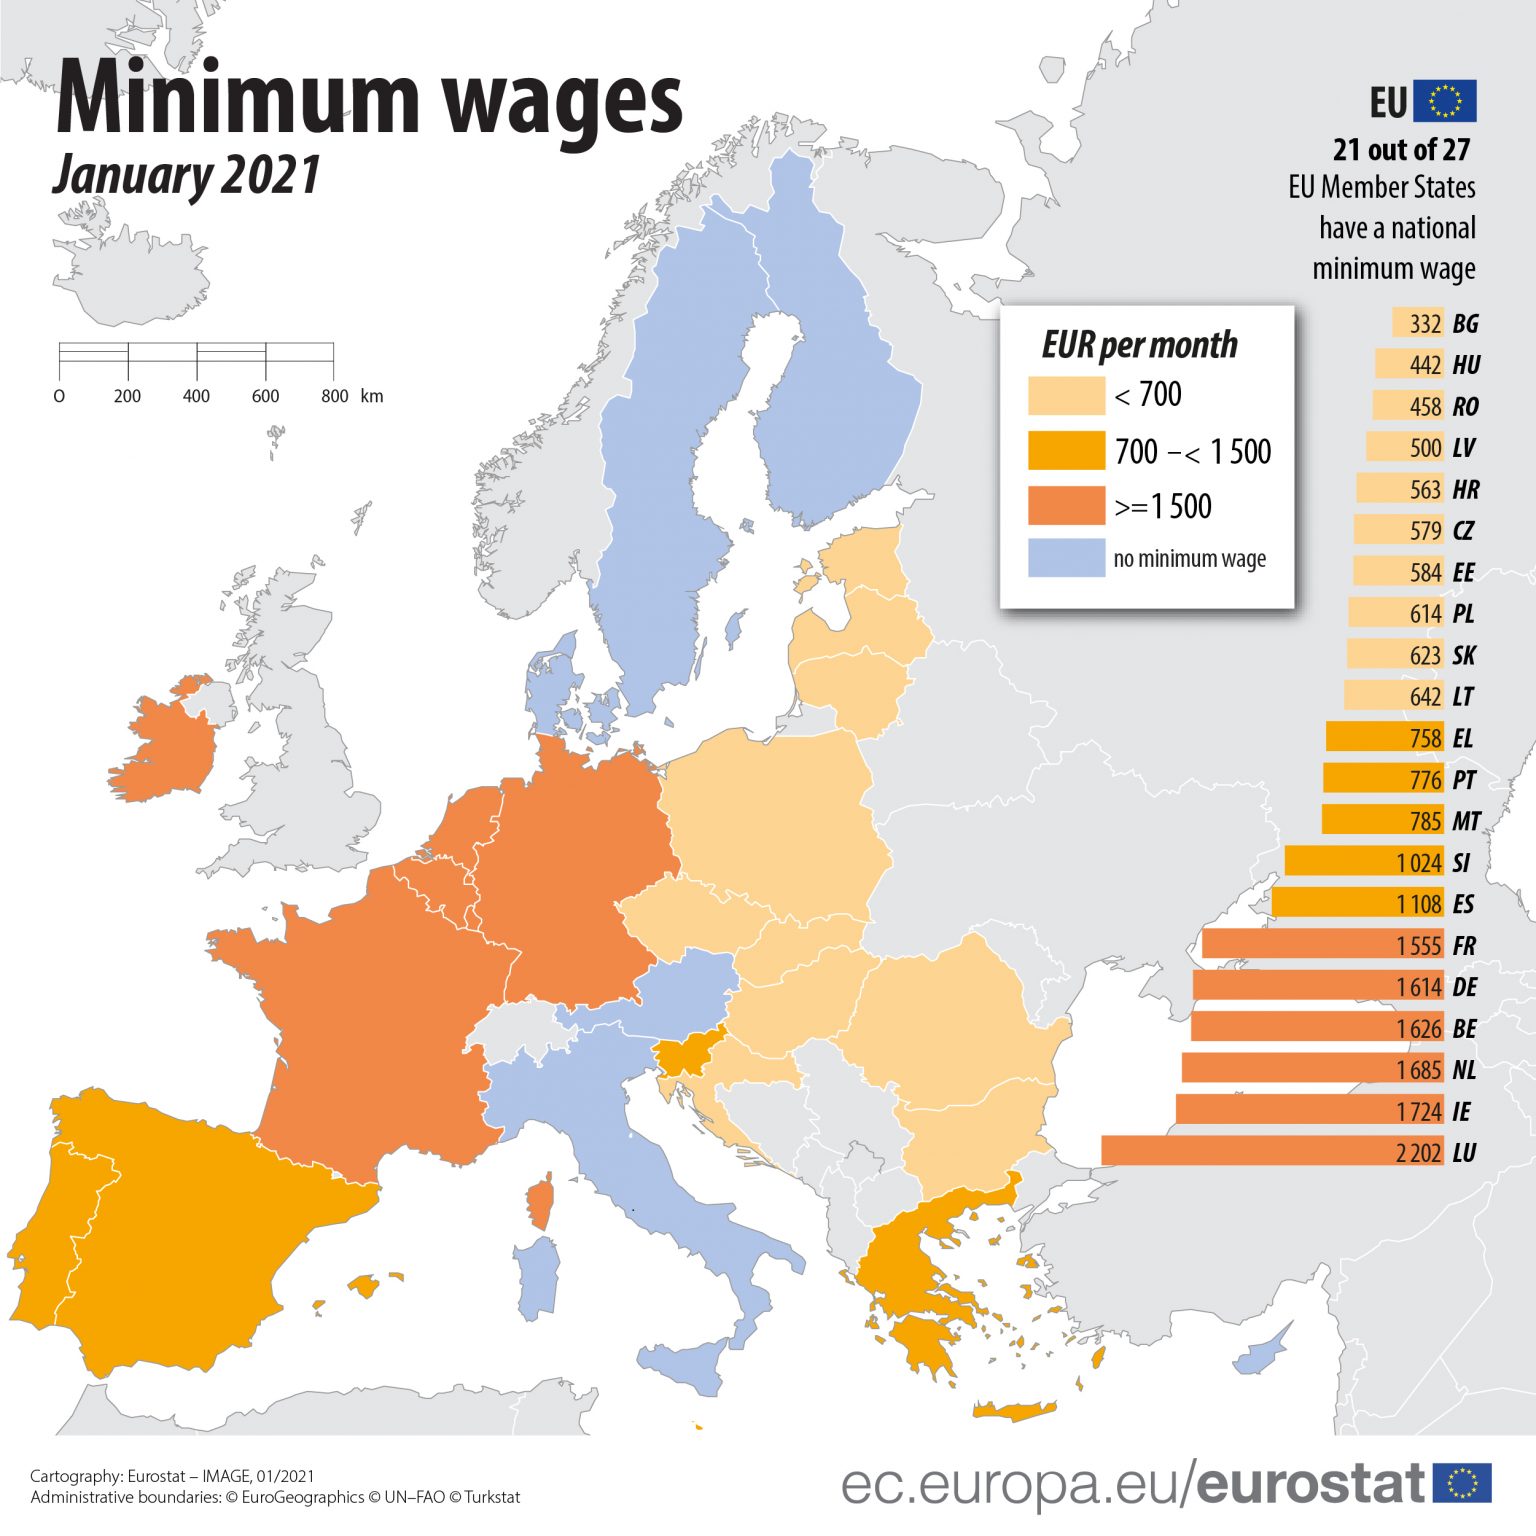 eu-minimum-wage-policy-would-hungary-benefit-or-lose-if-implemented